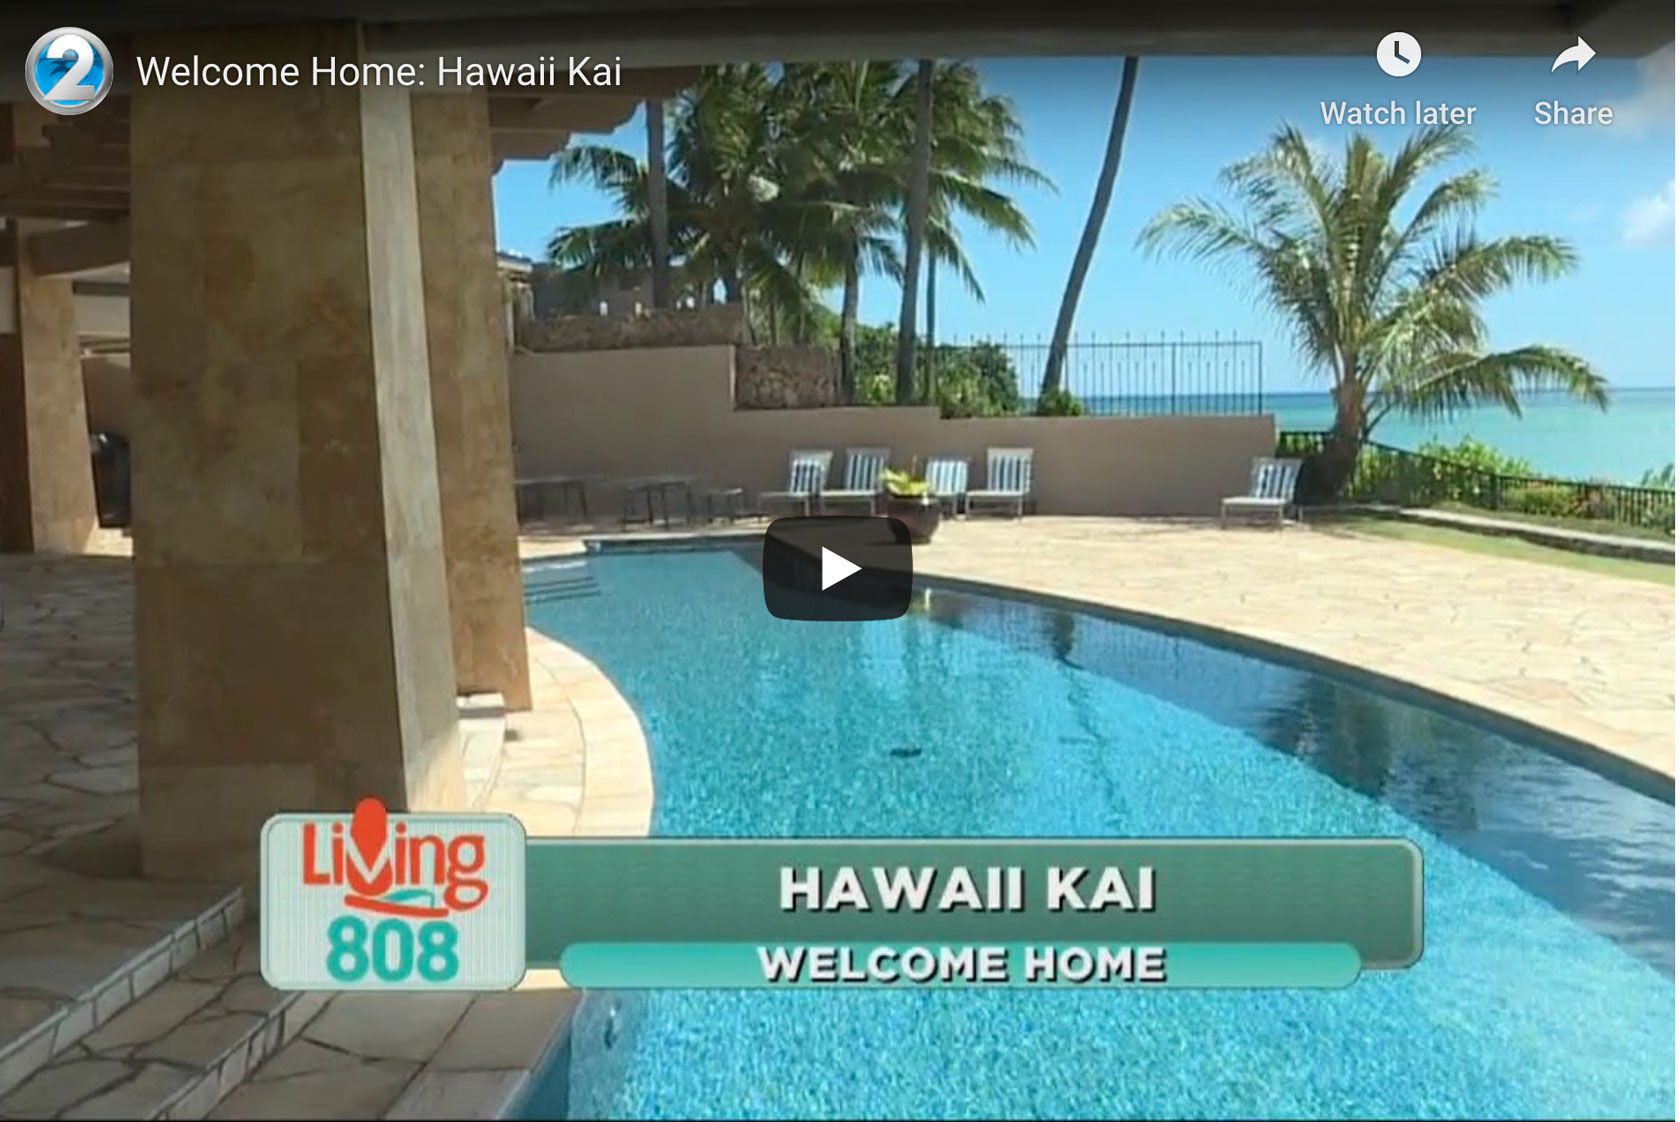 Dolores Panlilio Bediones - Watch Dolores Give a Real Estate Overview of Hawaii Kai on KHON